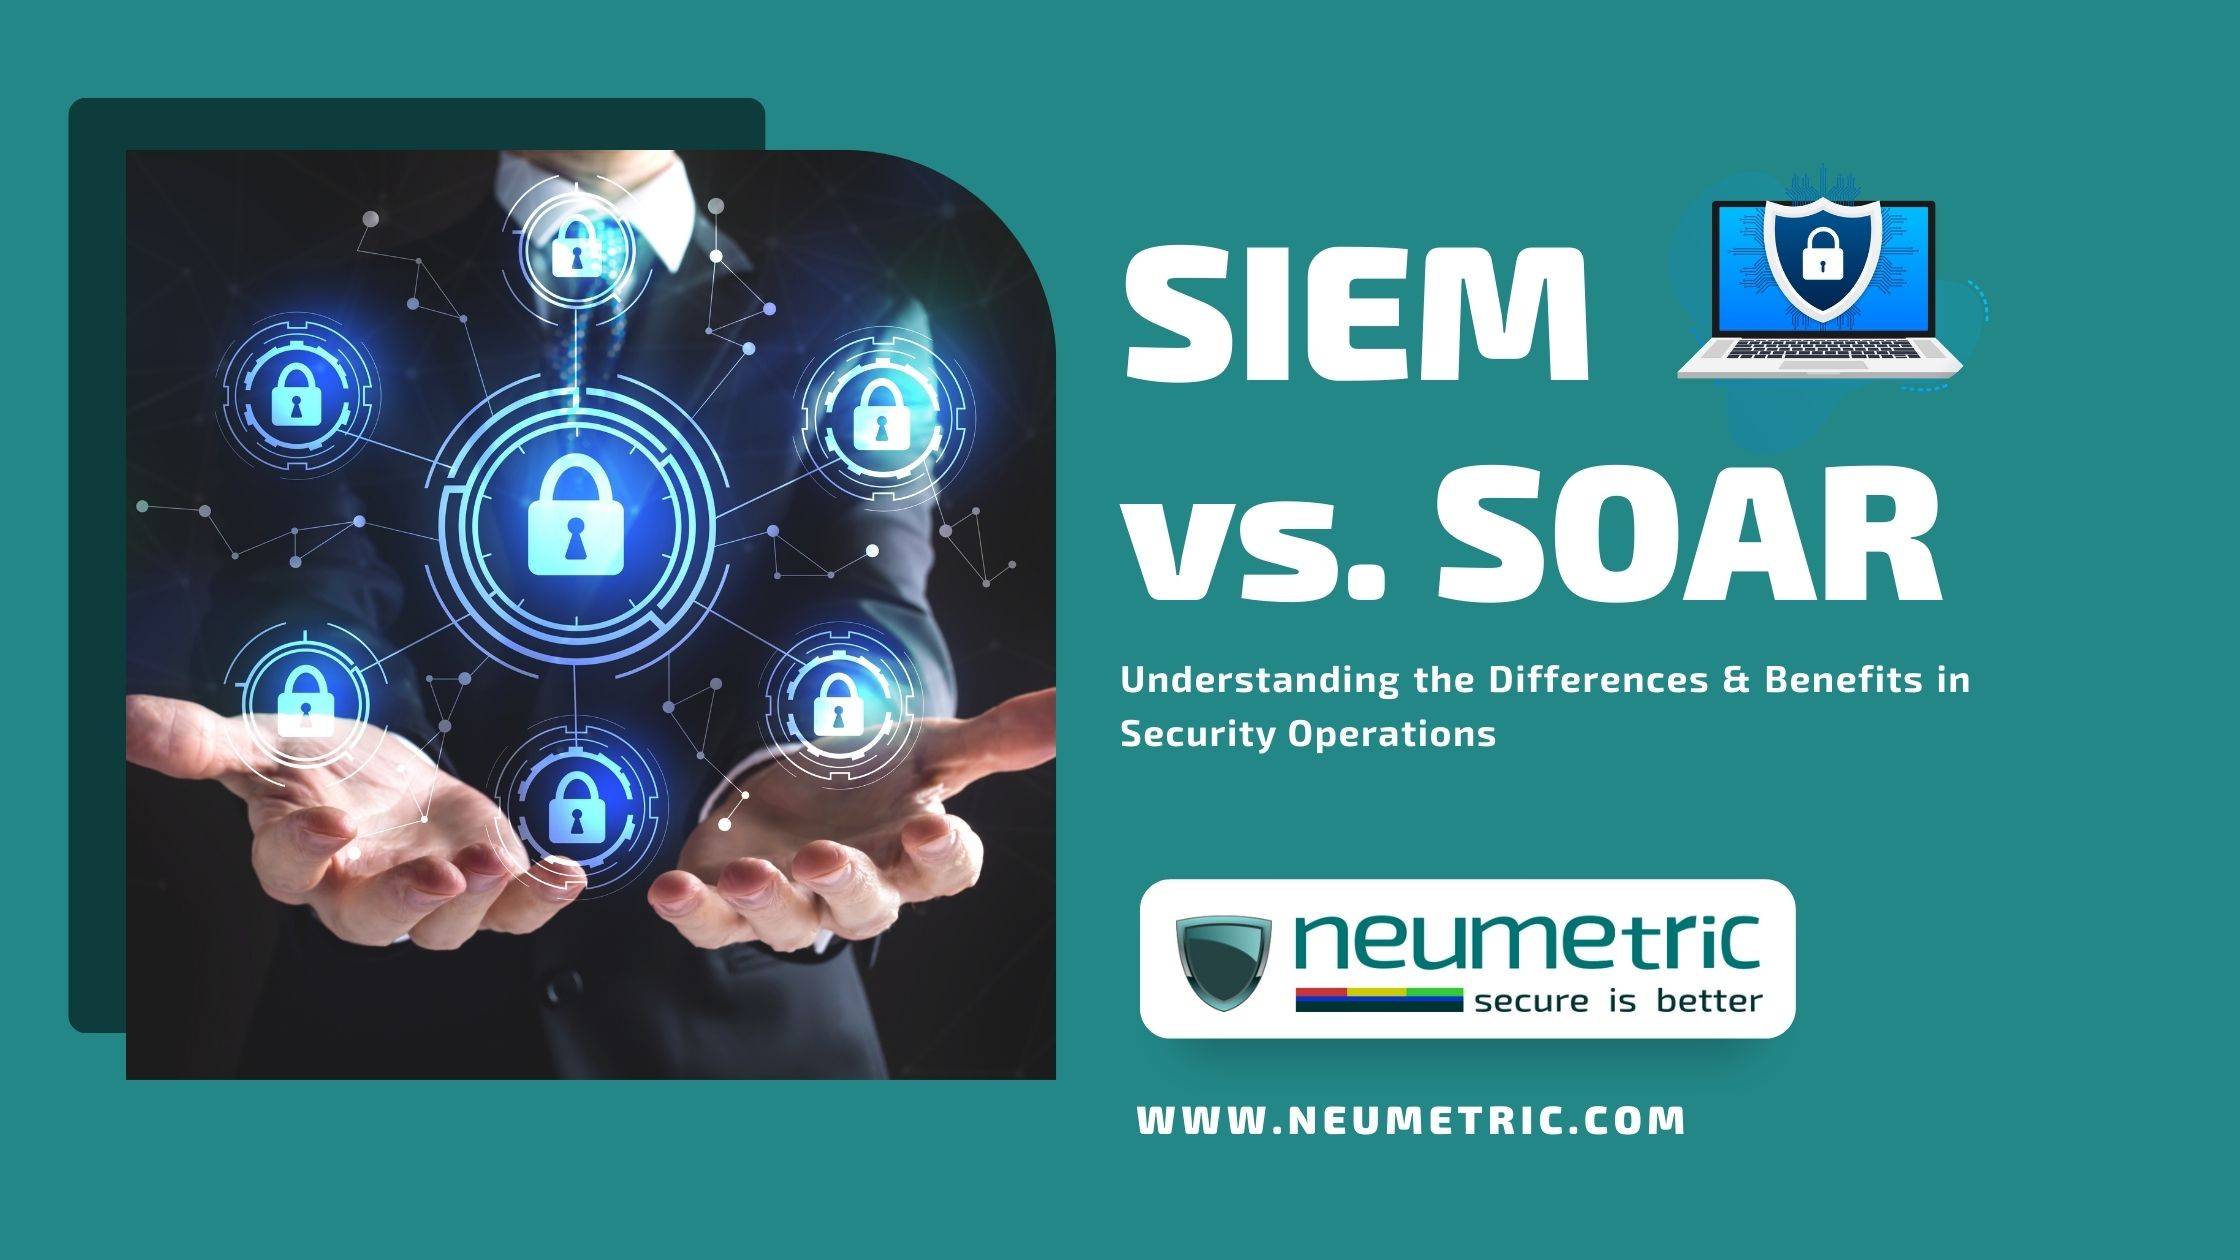 SIEM vs. SOAR: Understanding the Differences & Benefits in Security Operations